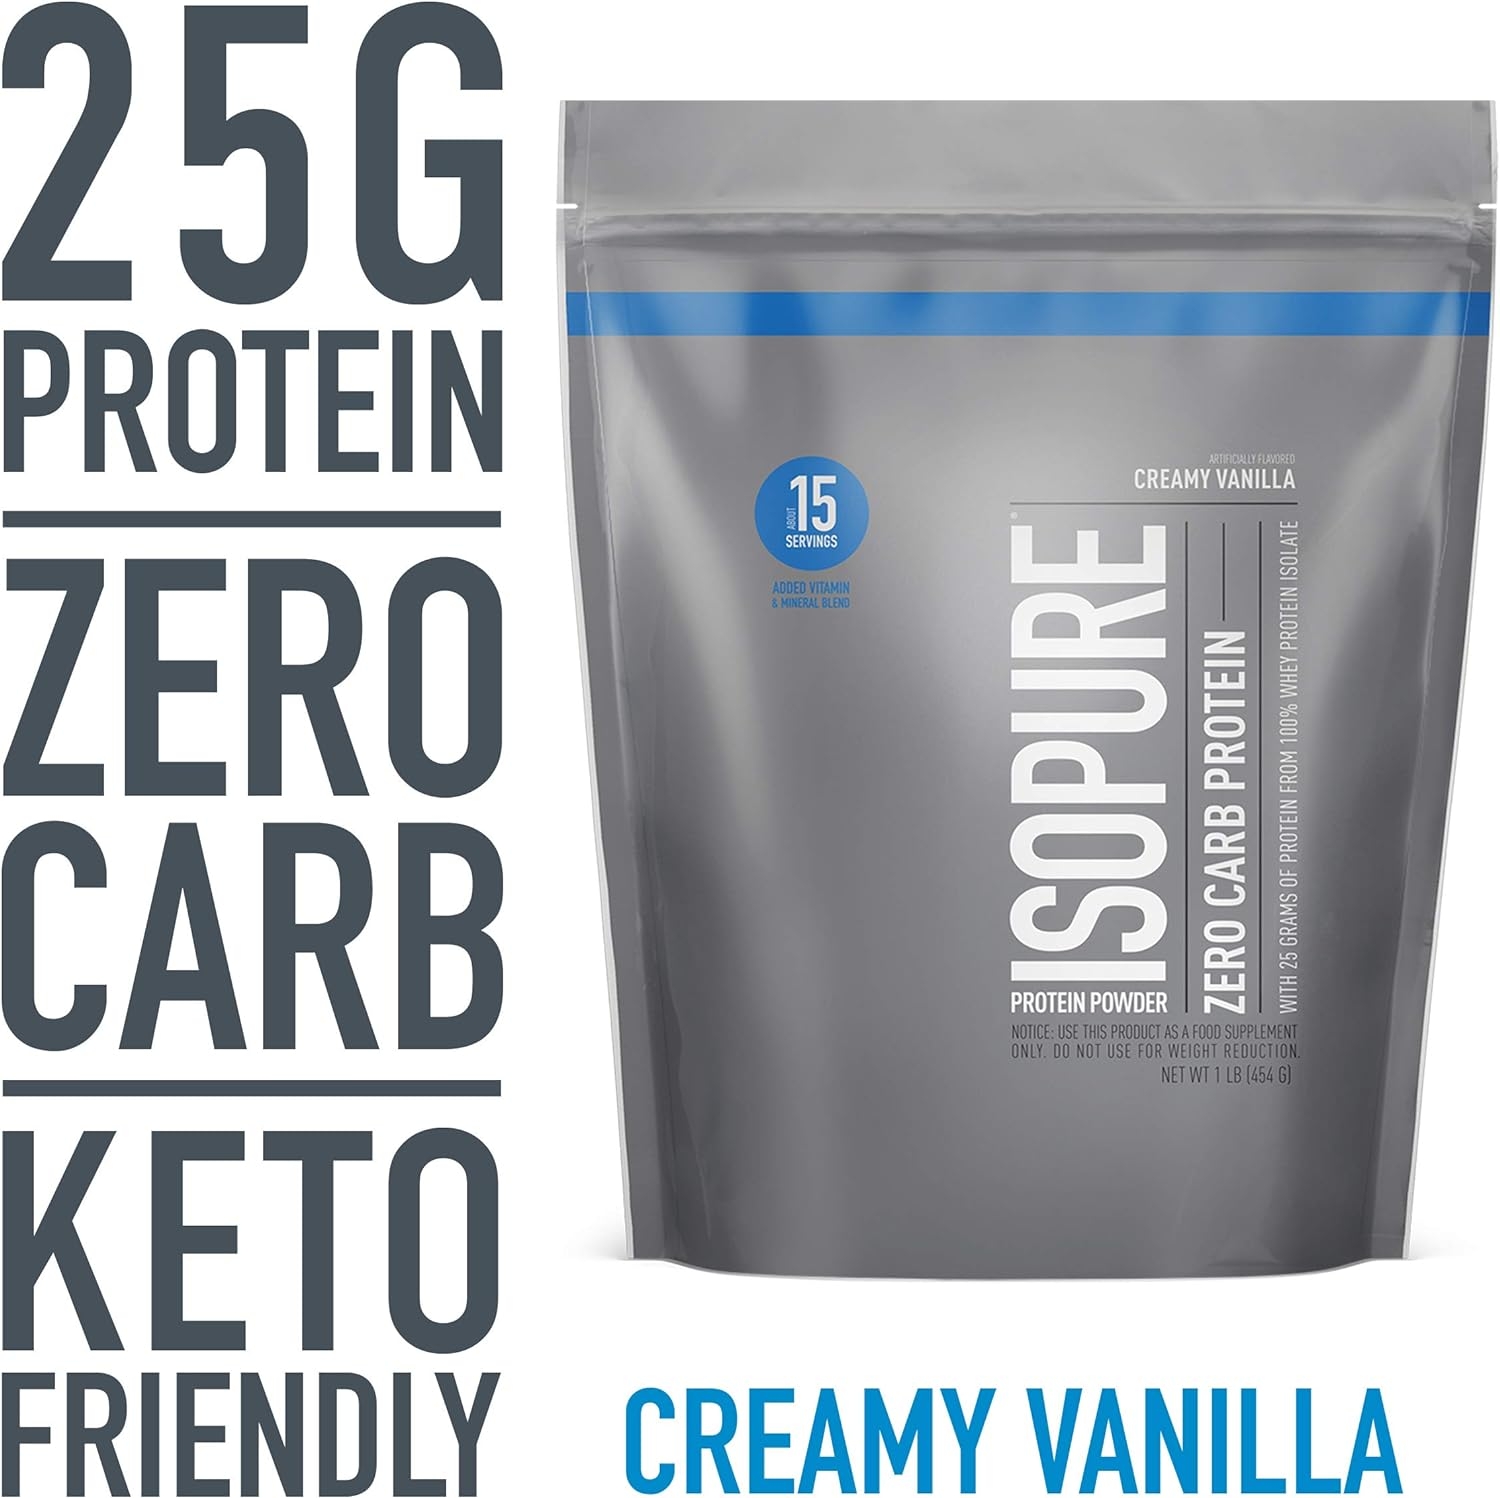 Isopure Zero Carb, Vitamin C and Zinc for Immune Support, 25g Protein, Keto Friendly Protein Powder, 100% Whey Protein Isolate, Flavor: Creamy Vanilla, 1 Pound (Packaging May Vary)